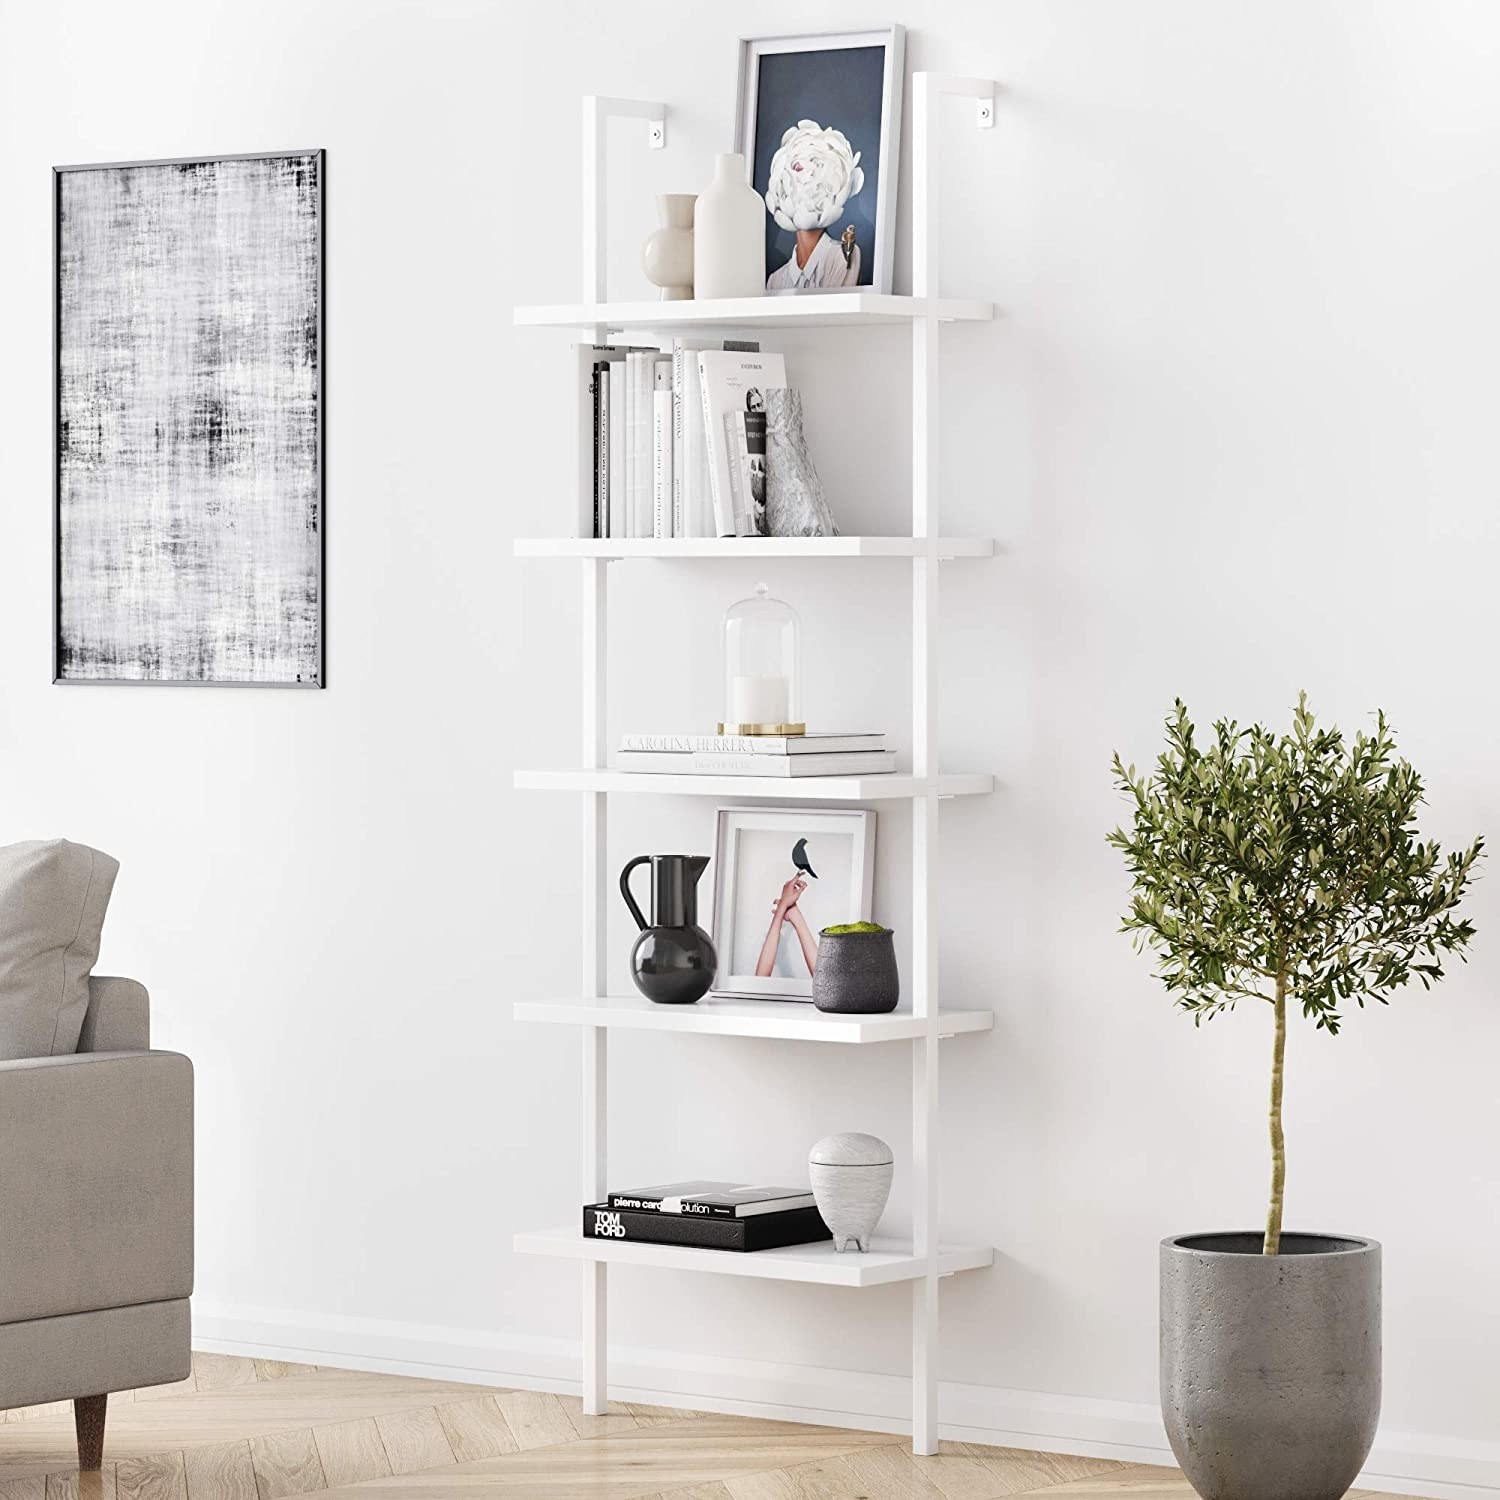 White industrial bookshelf on white wall with various decorative items and books